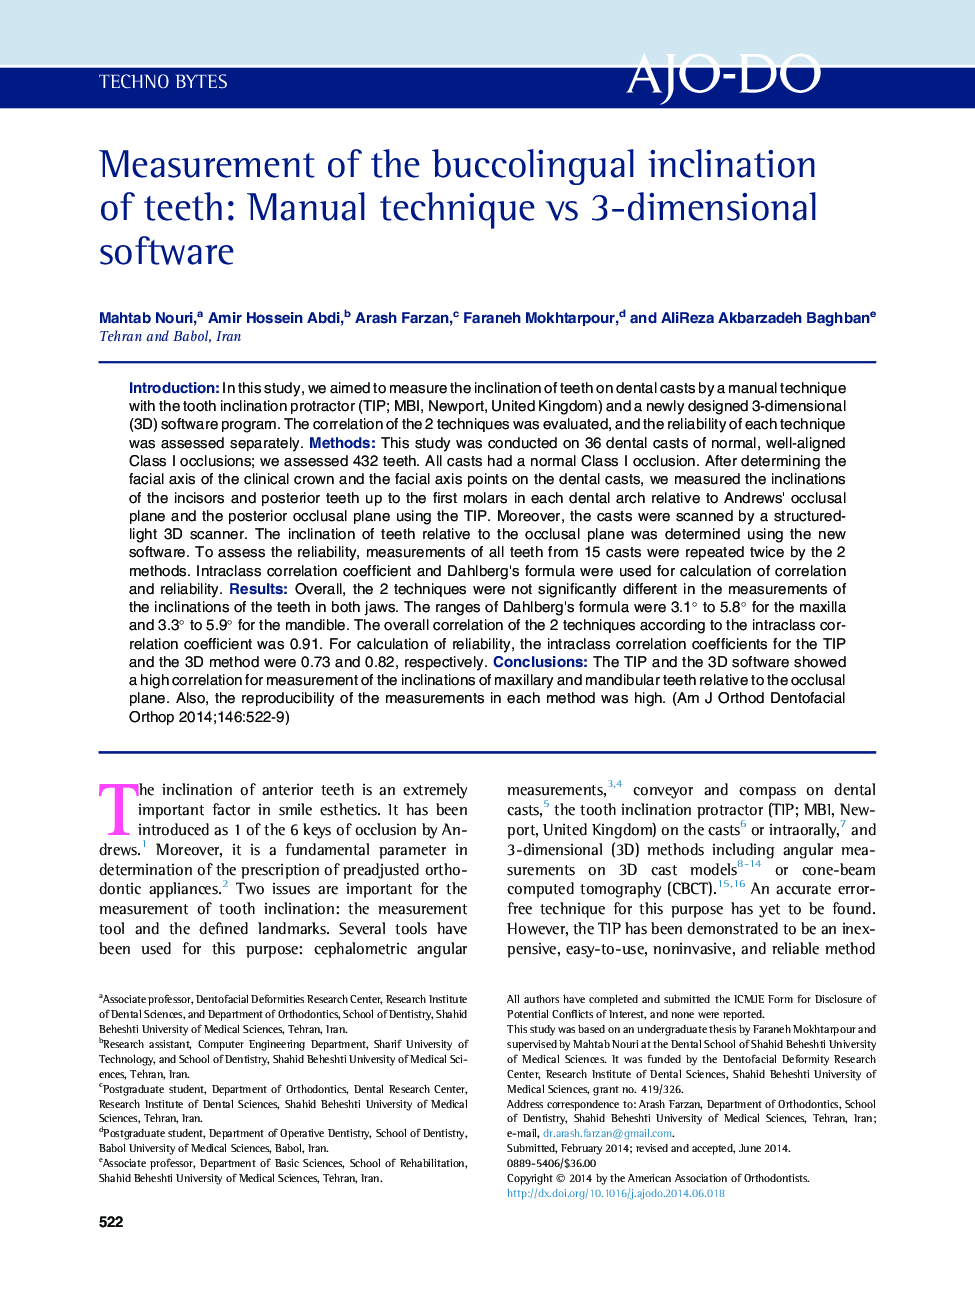 Measurement of the buccolingual inclination of teeth: Manual technique vs 3-dimensional software 